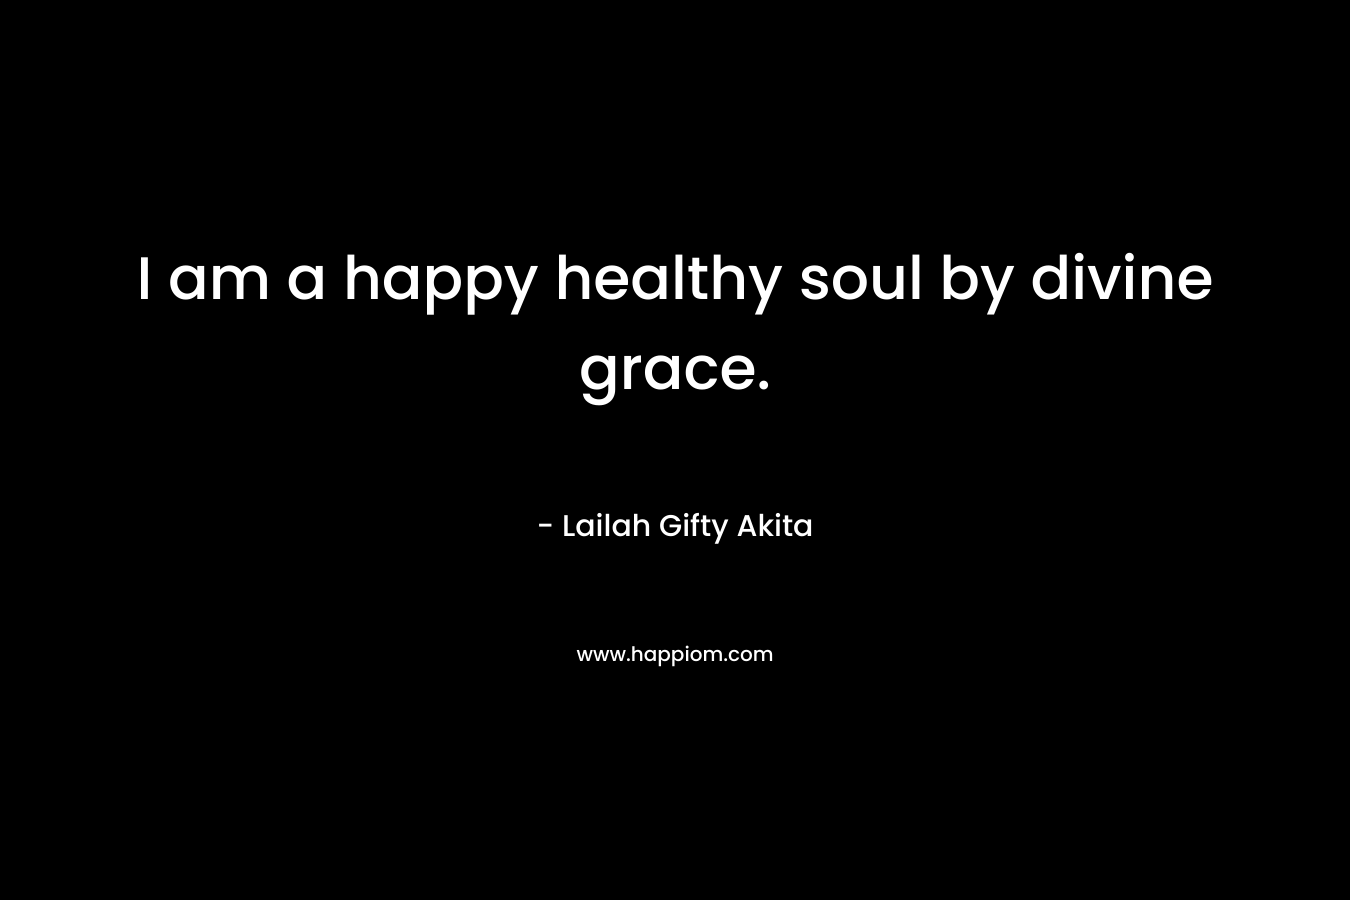 I am a happy healthy soul by divine grace.